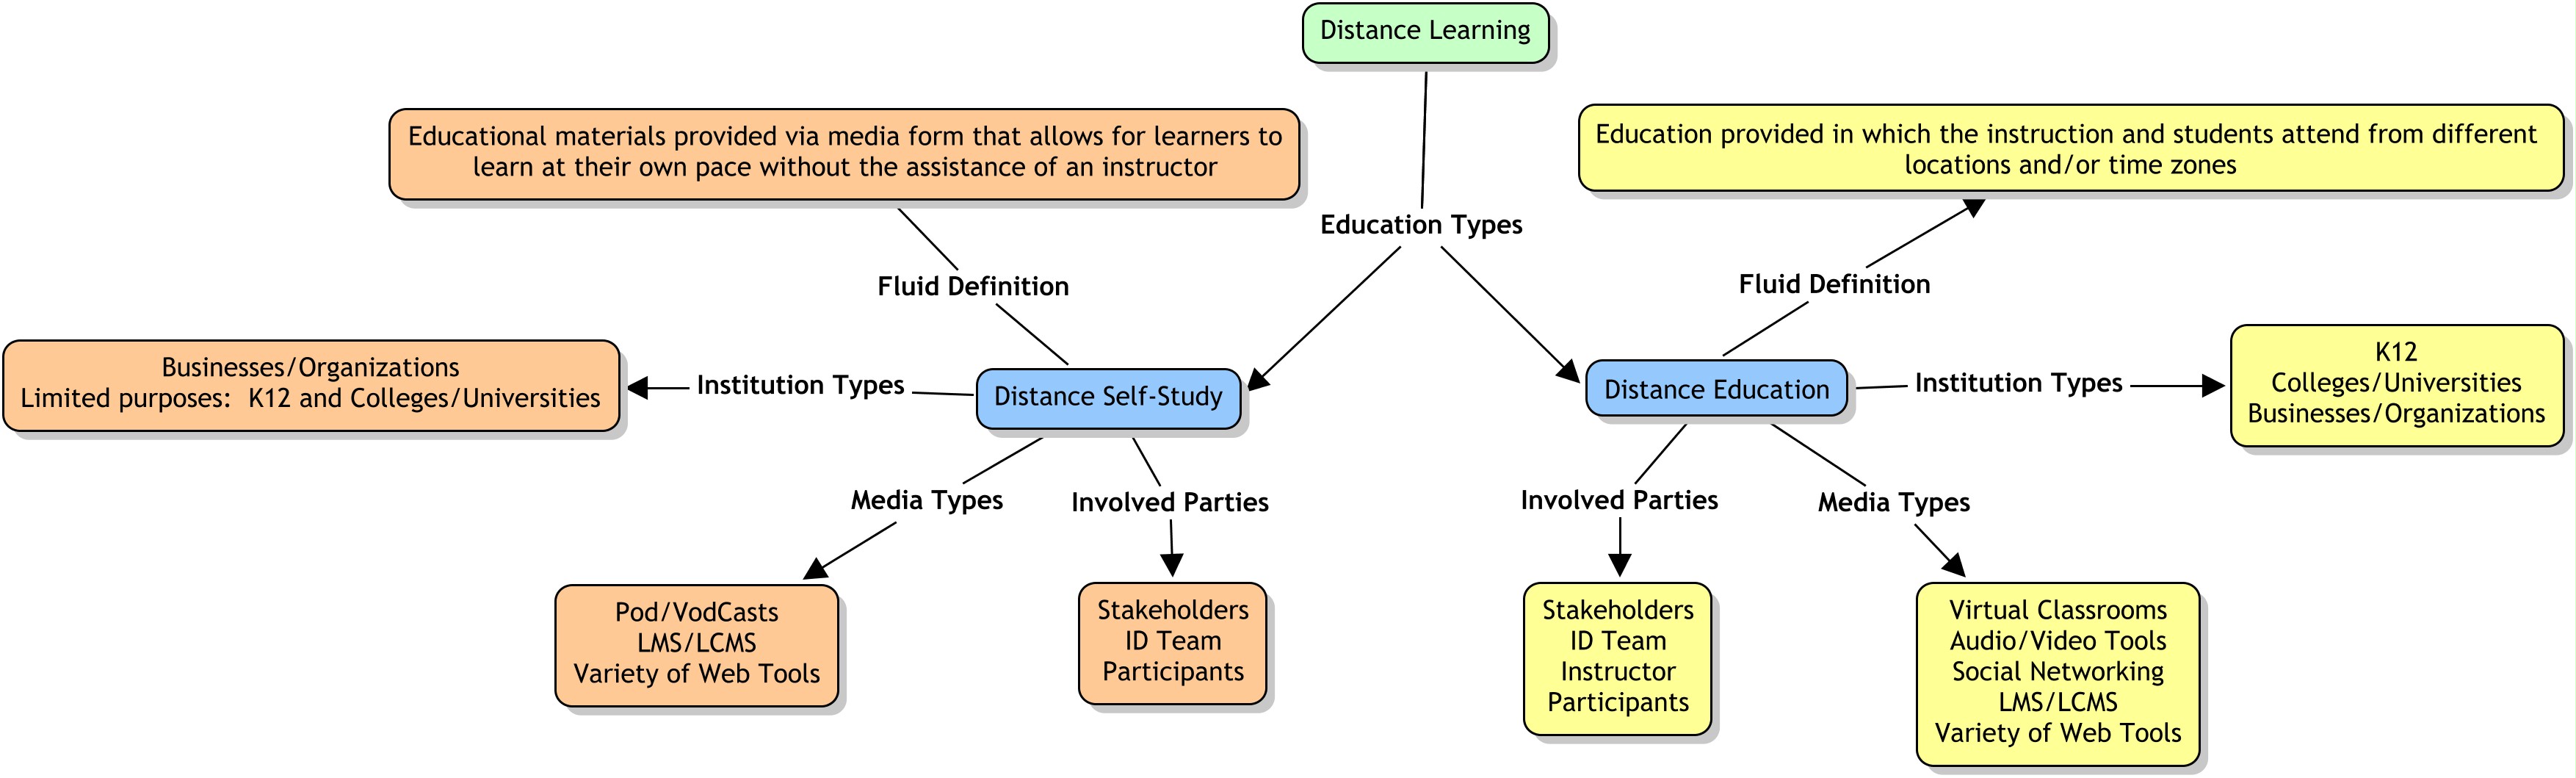 Types of distance Education. Types of distance Learning Systems. Types of Education. Distant or distance Learning. Their distance